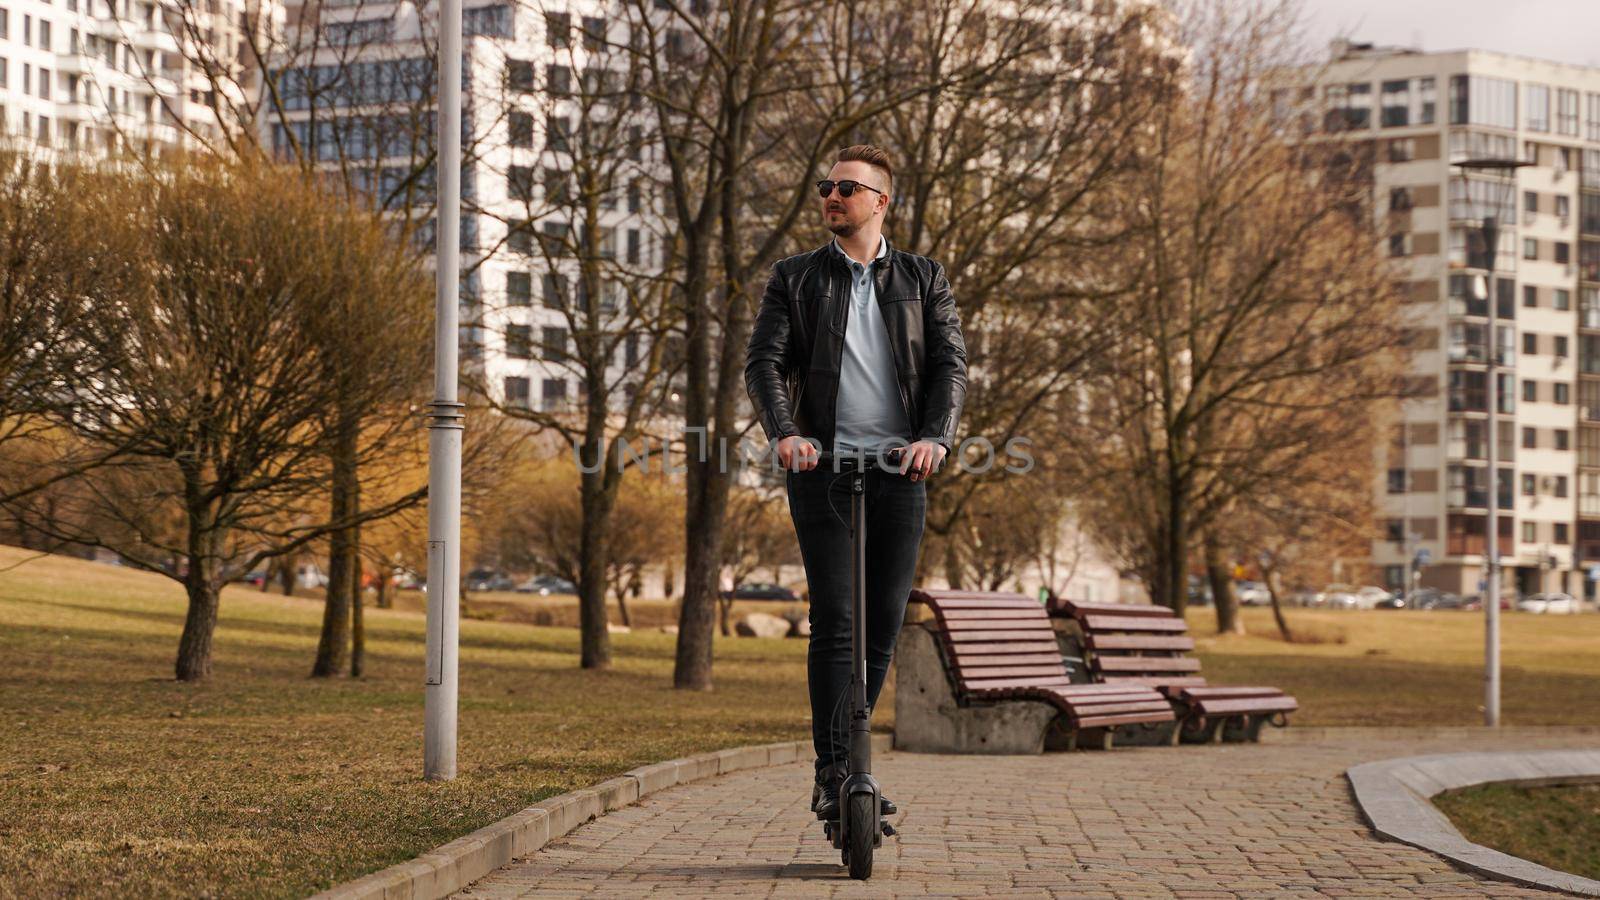 Young man in a black jacket and sunglasses rides an electronic scooter in a spring park on a sunny day